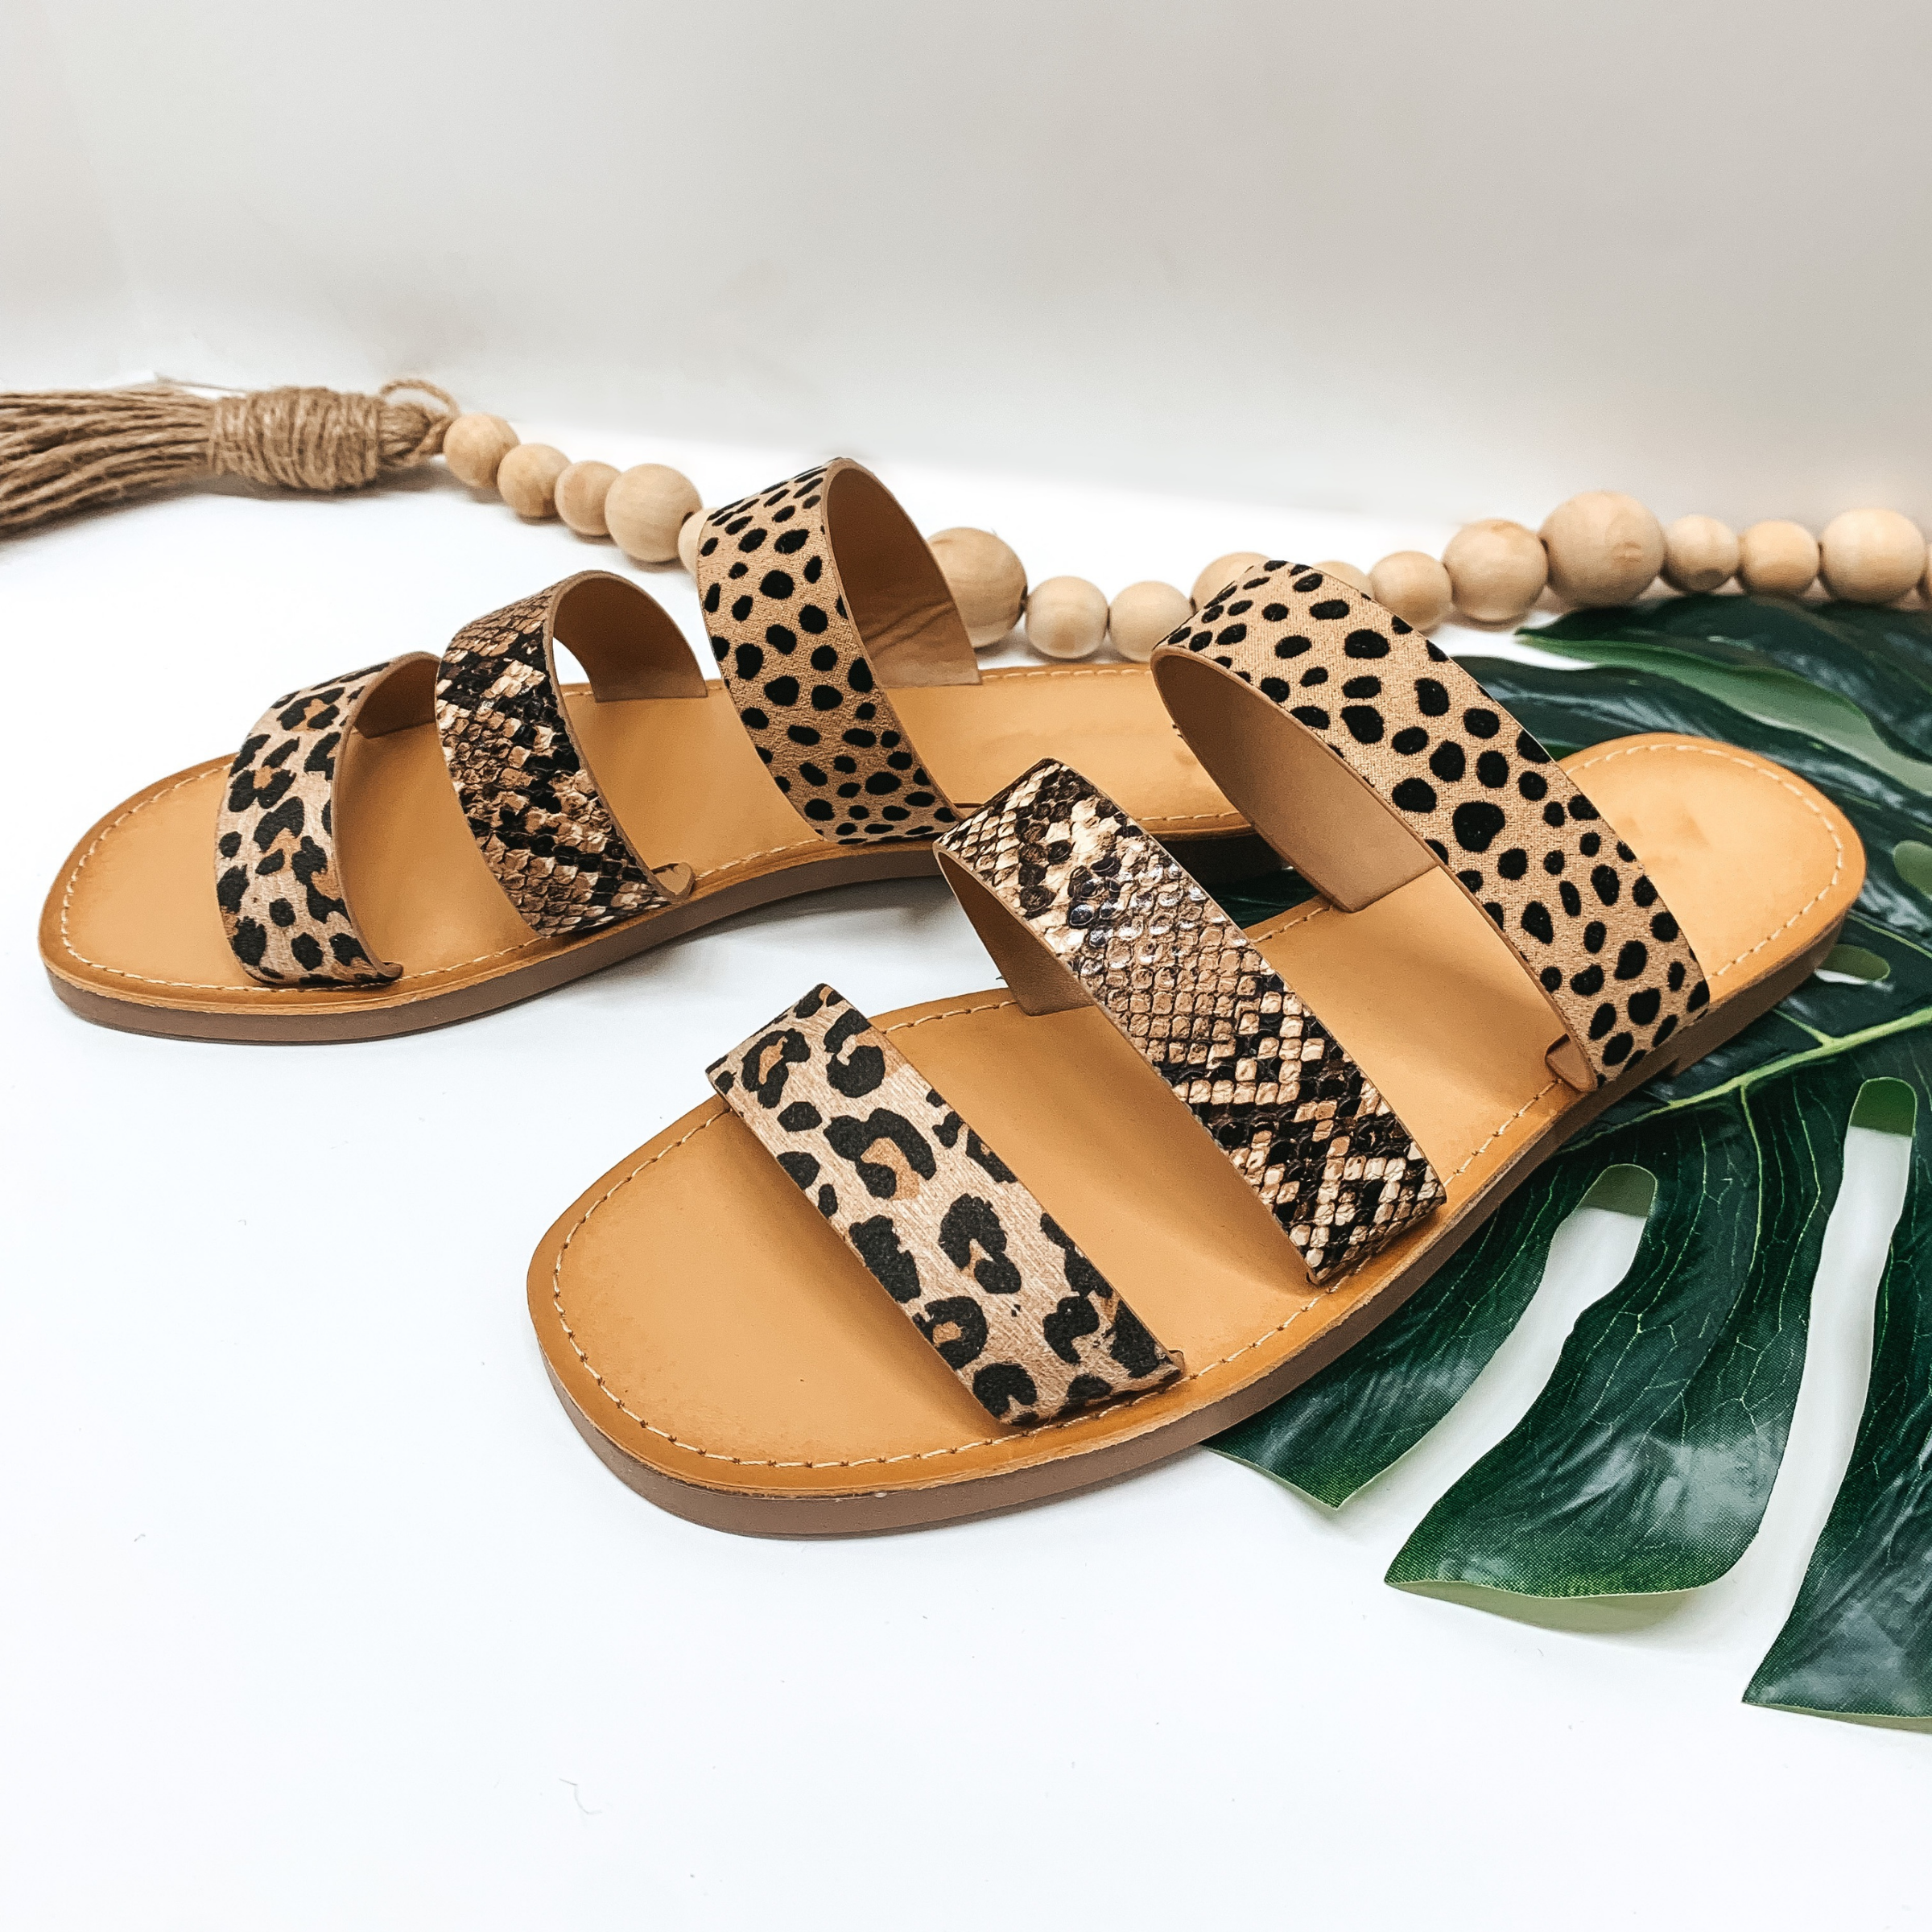 Stepping Up Three Strap Slide On Sandals in Mixed Animal Print - Giddy Up Glamour Boutique